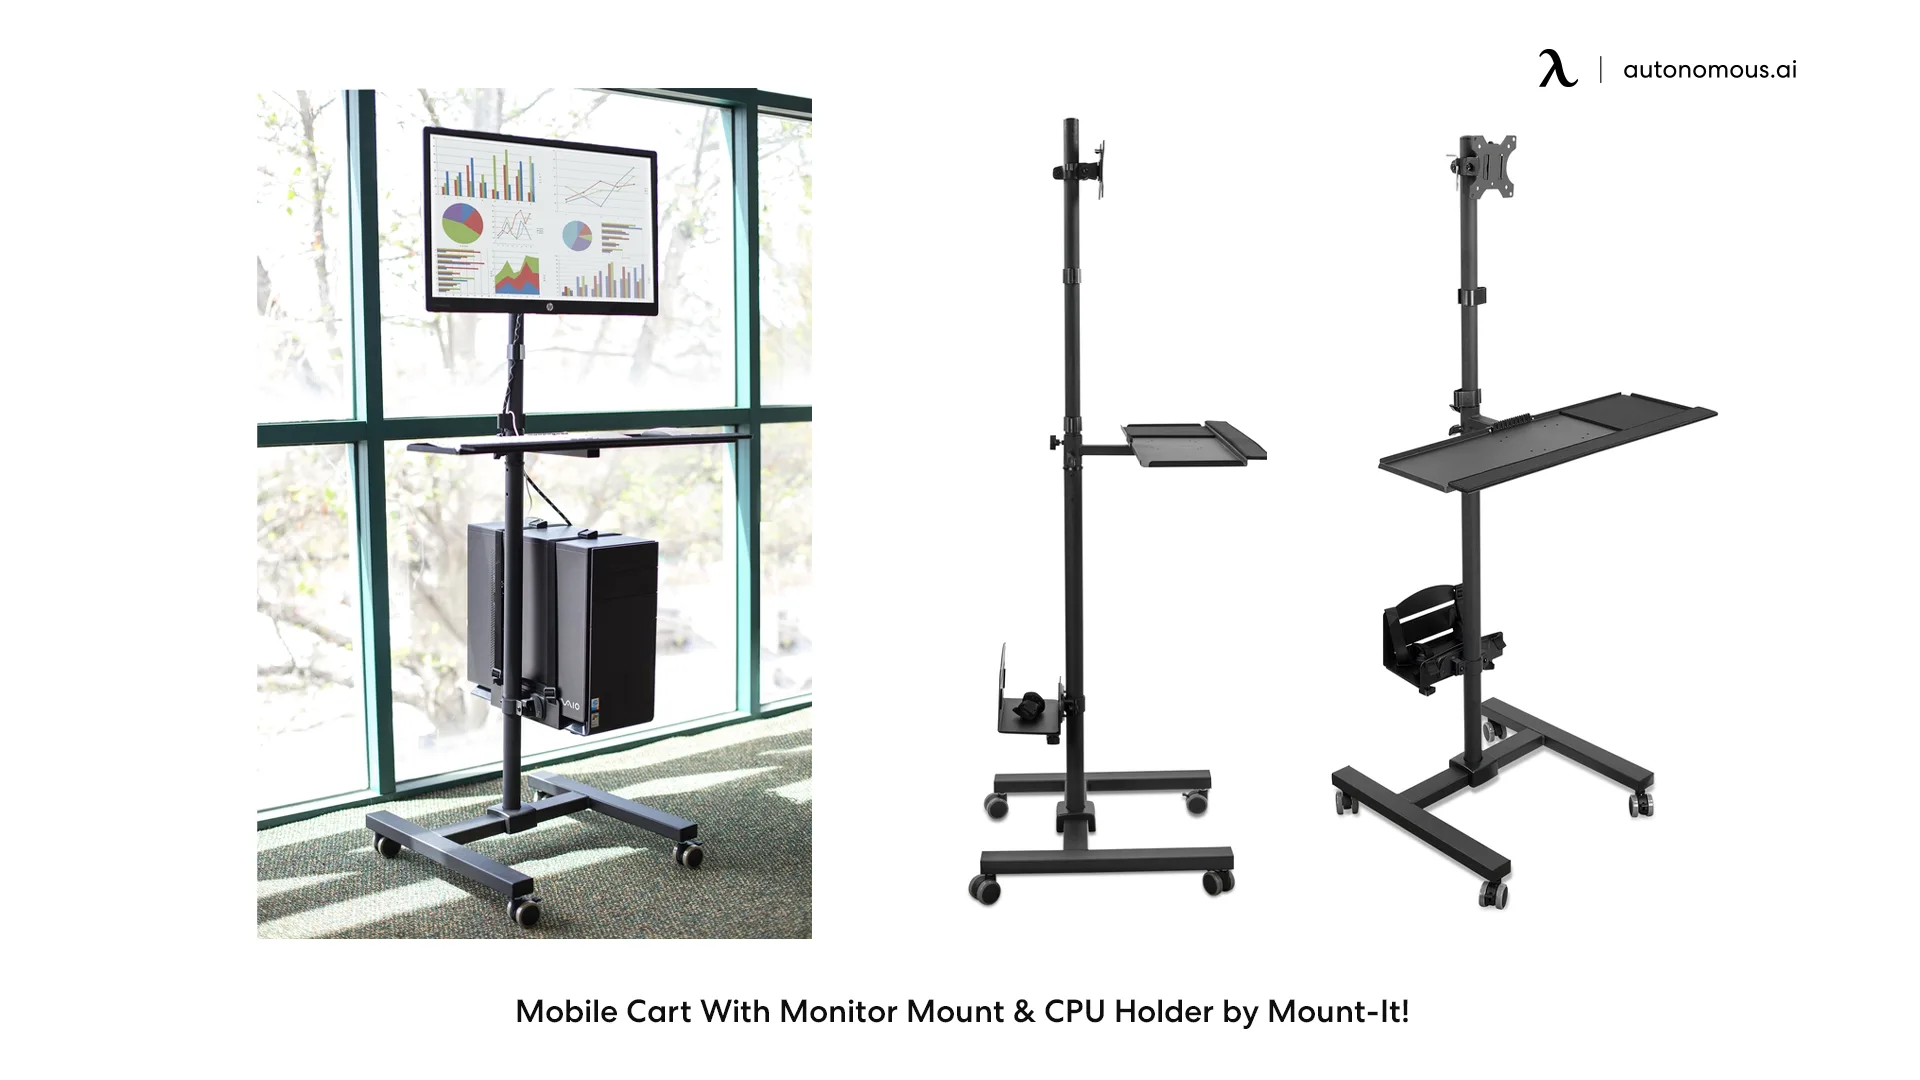 Mobile Computer Cart office desk with monitor stand